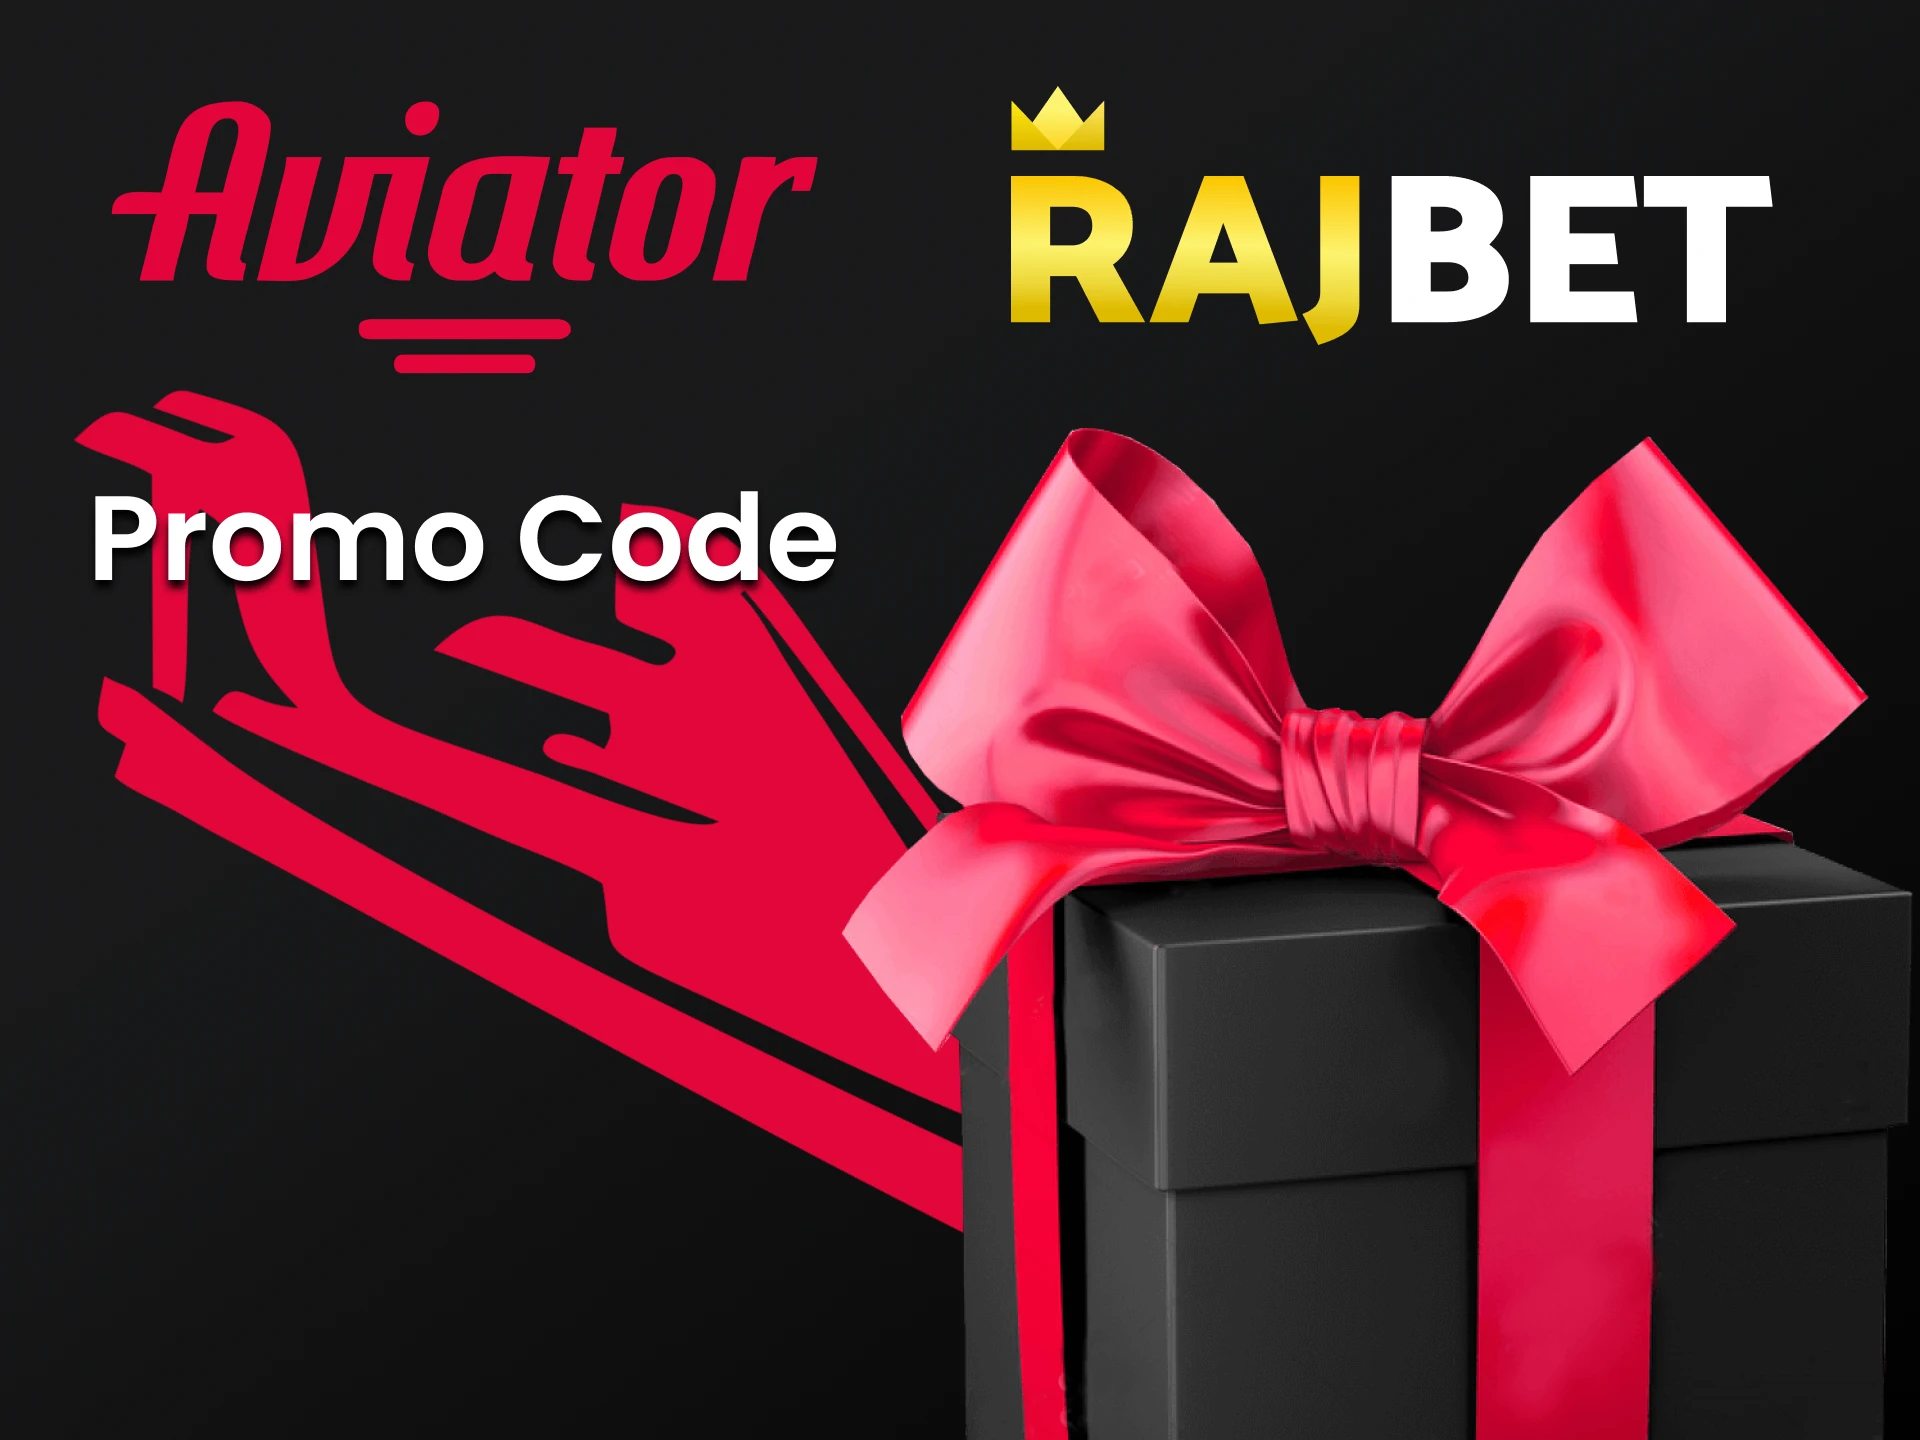 Enter the promo code for Aviator from Rajbet.